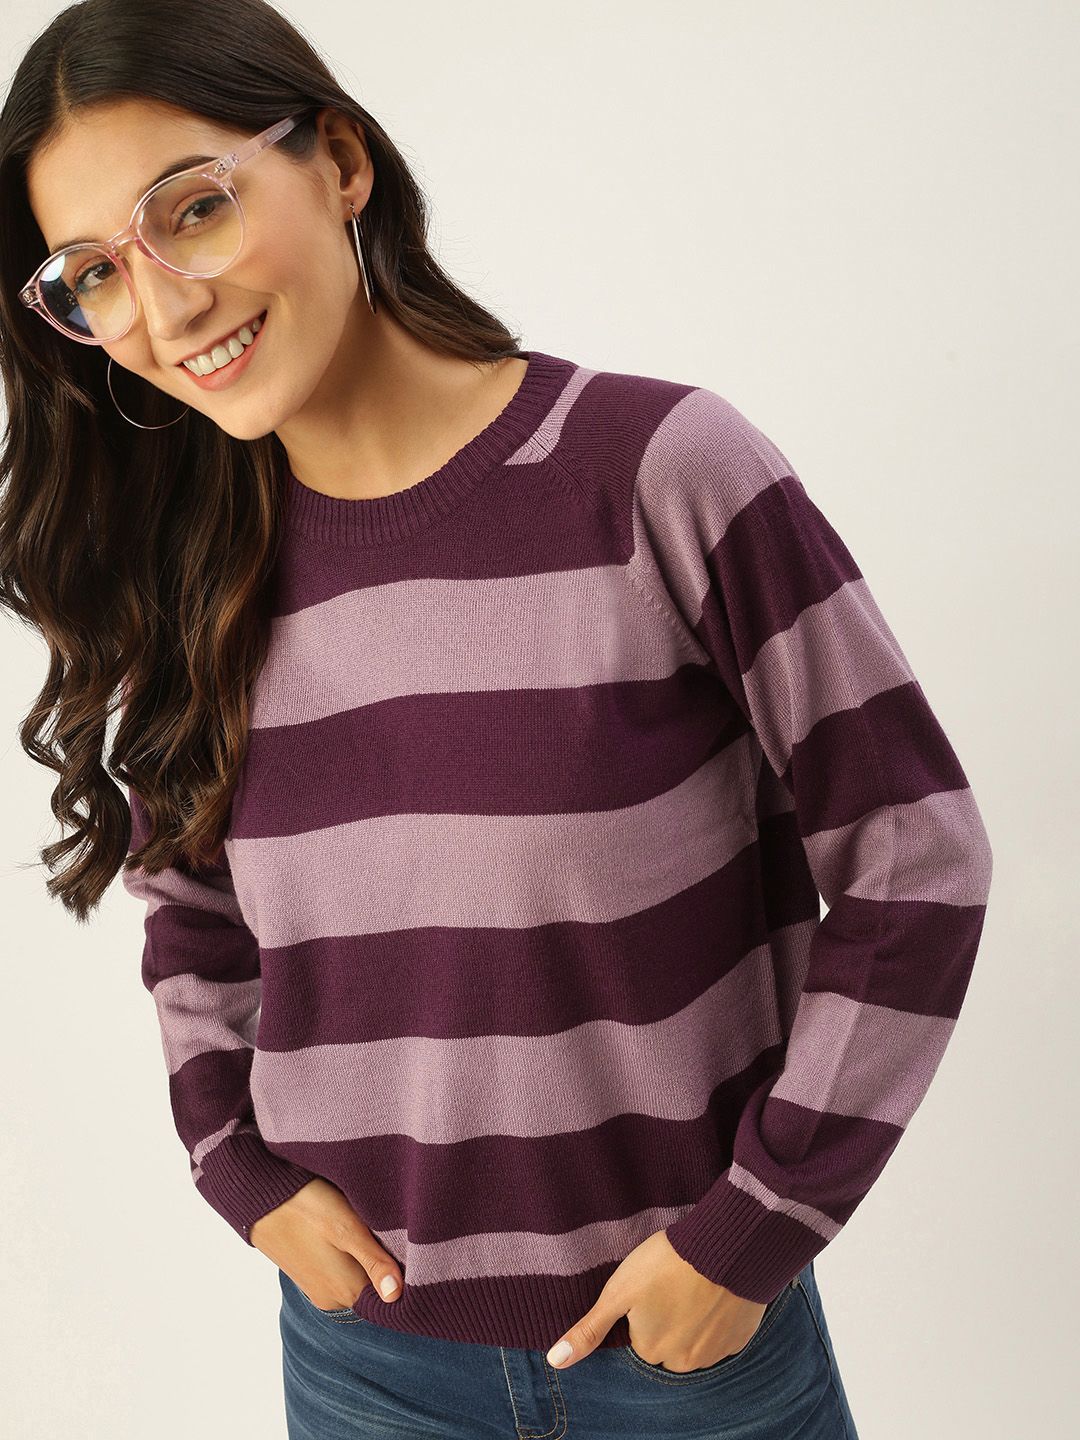 FOREVER 21 Purple & Mauve Knitted Striped Top Price in India